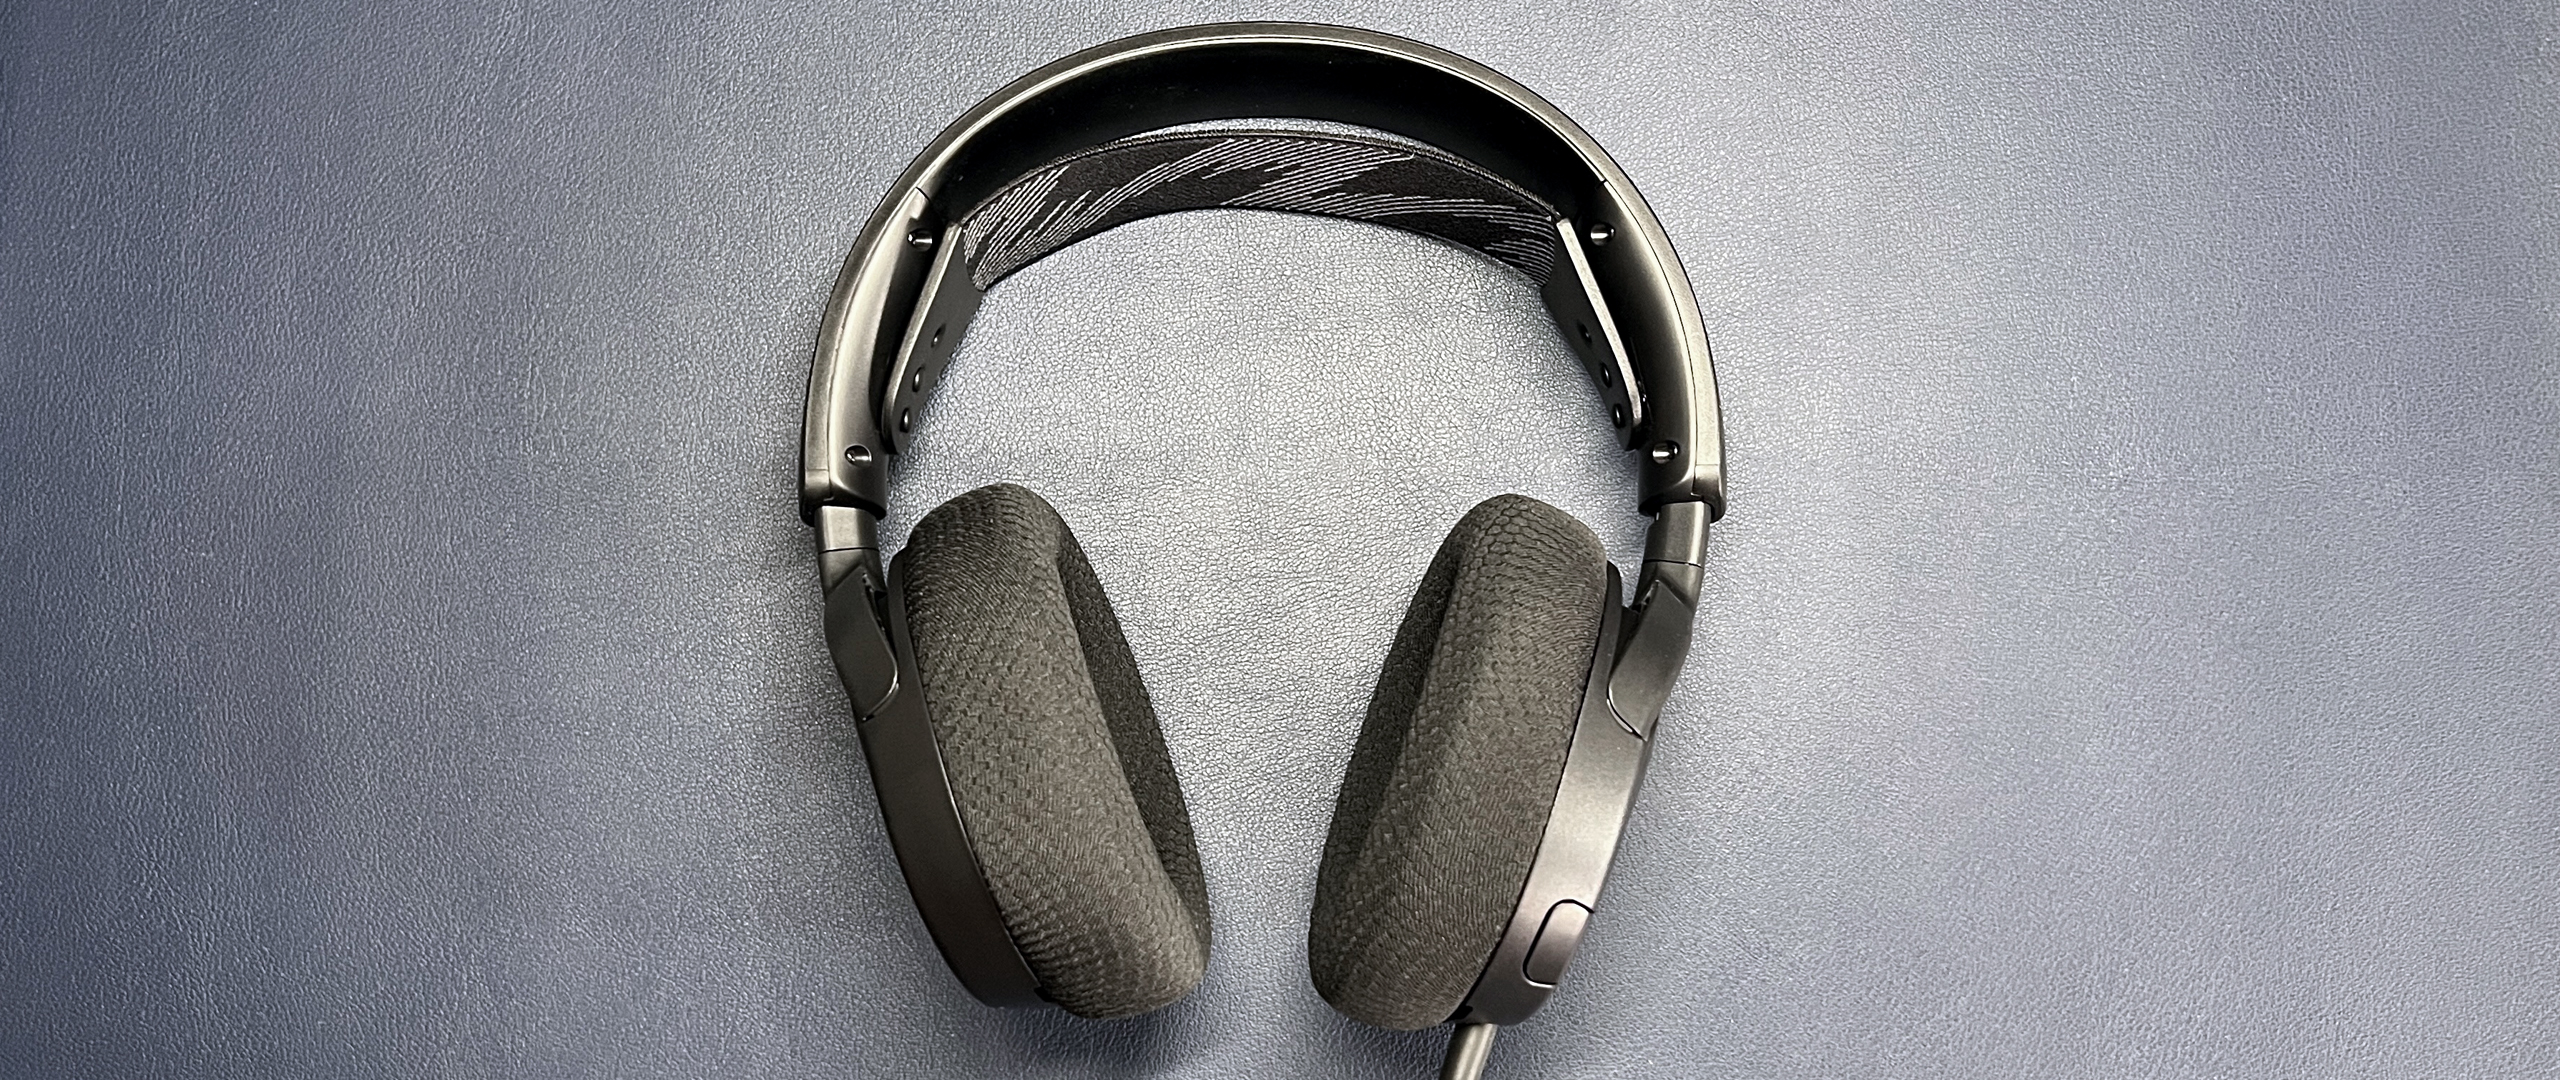 SteelSeries Arctis Nova 1 review: A very well-considered headset